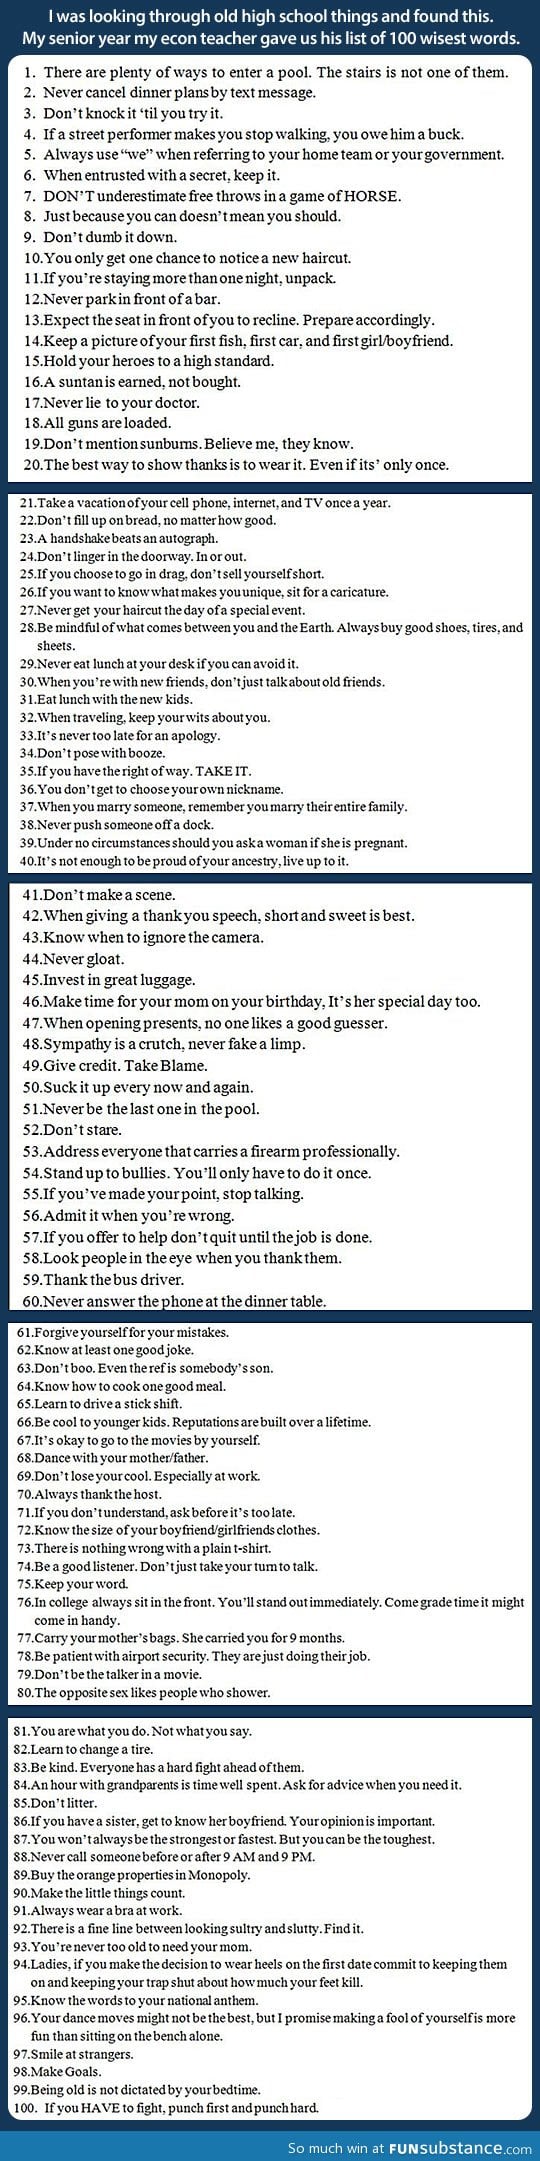 A list of 100 wisest phrases